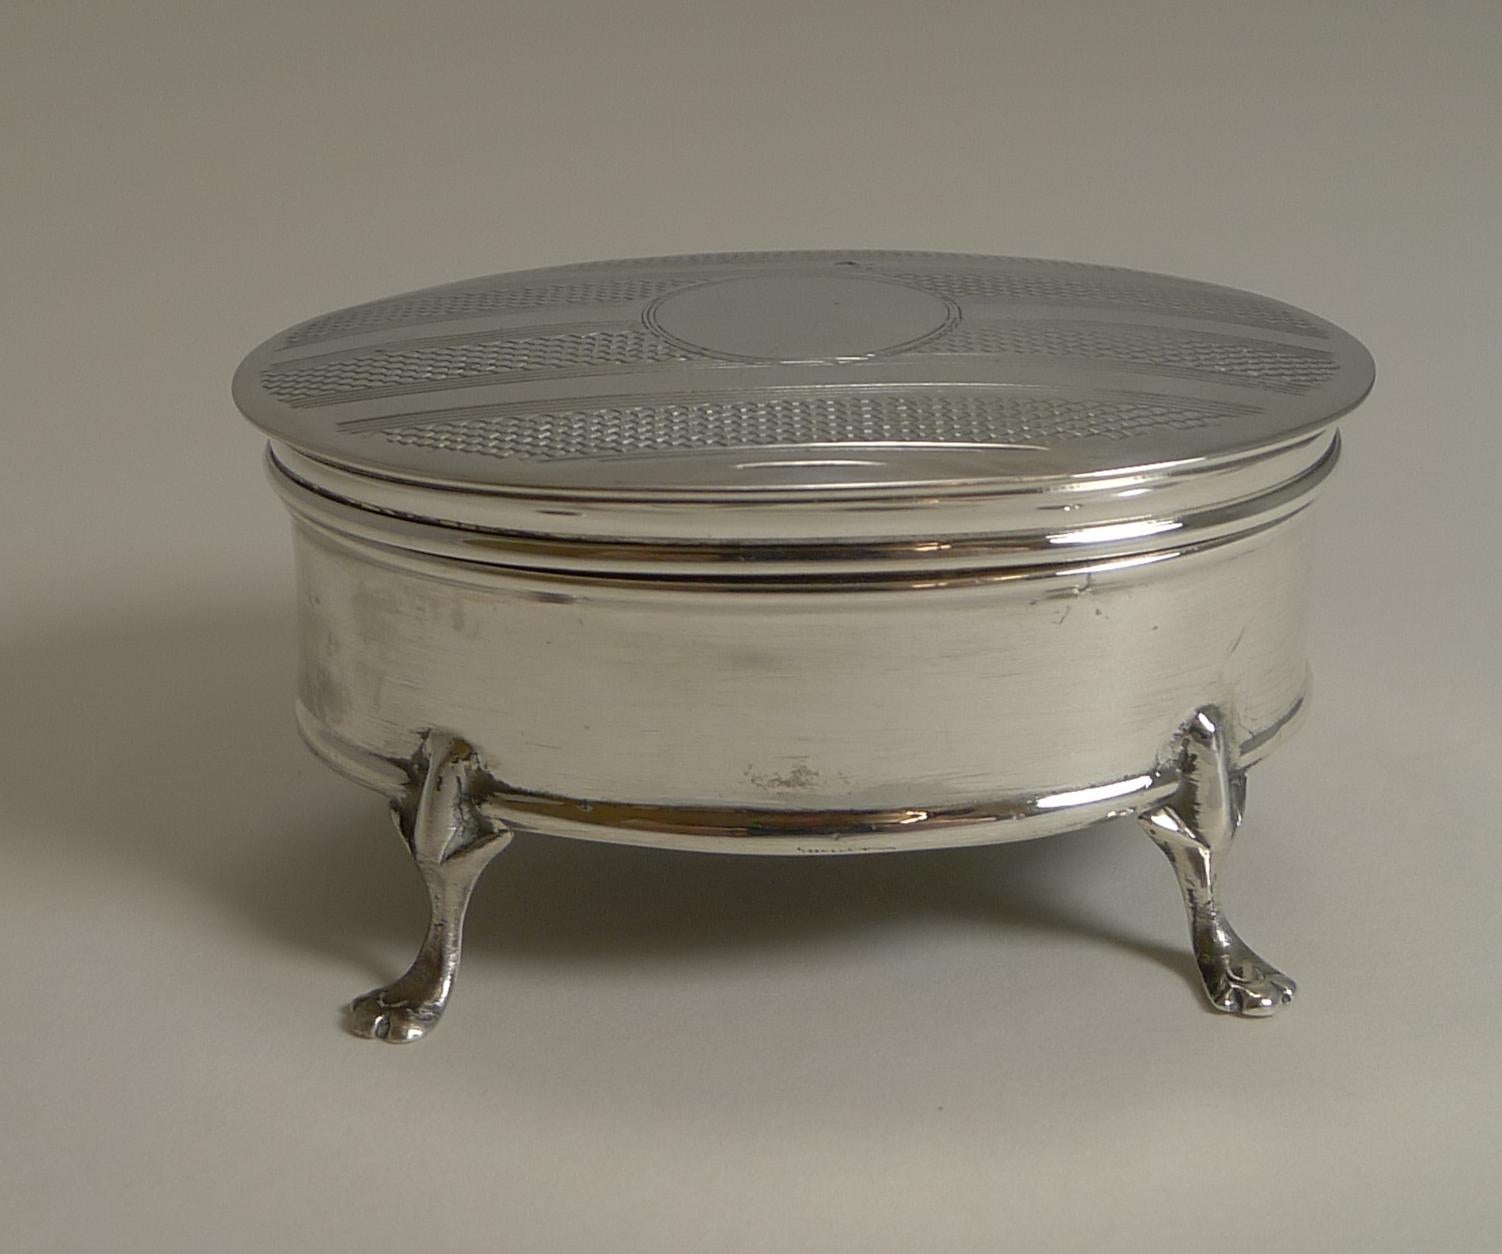 A smart little jewelry / ring box standing on four legs.

The hinged lid is decorated with an engine turned striped design with a central circular vacant cartouche. Once the lid is opened the gilded underside is revealed. The box retains its